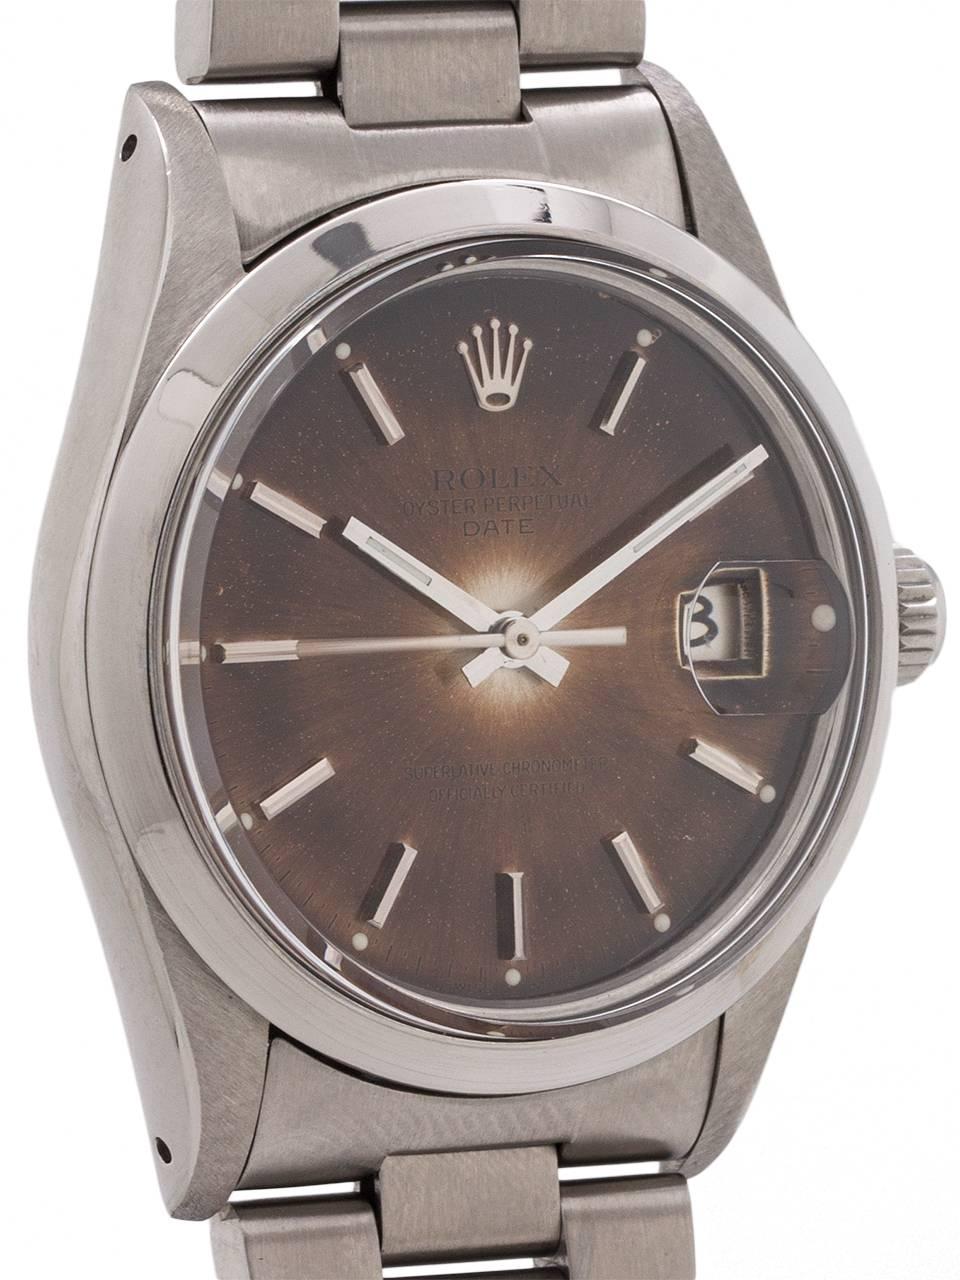 
A remarkably “delicious” looking natural dark expresso dial Rolex stainless steel Oyster Perpetual Date model ref # 15000 serial# 7.0 million circa 1983. Featuring a 34mm diameter case with smooth bezel and acrylic crystal. And featuring a gorgeous